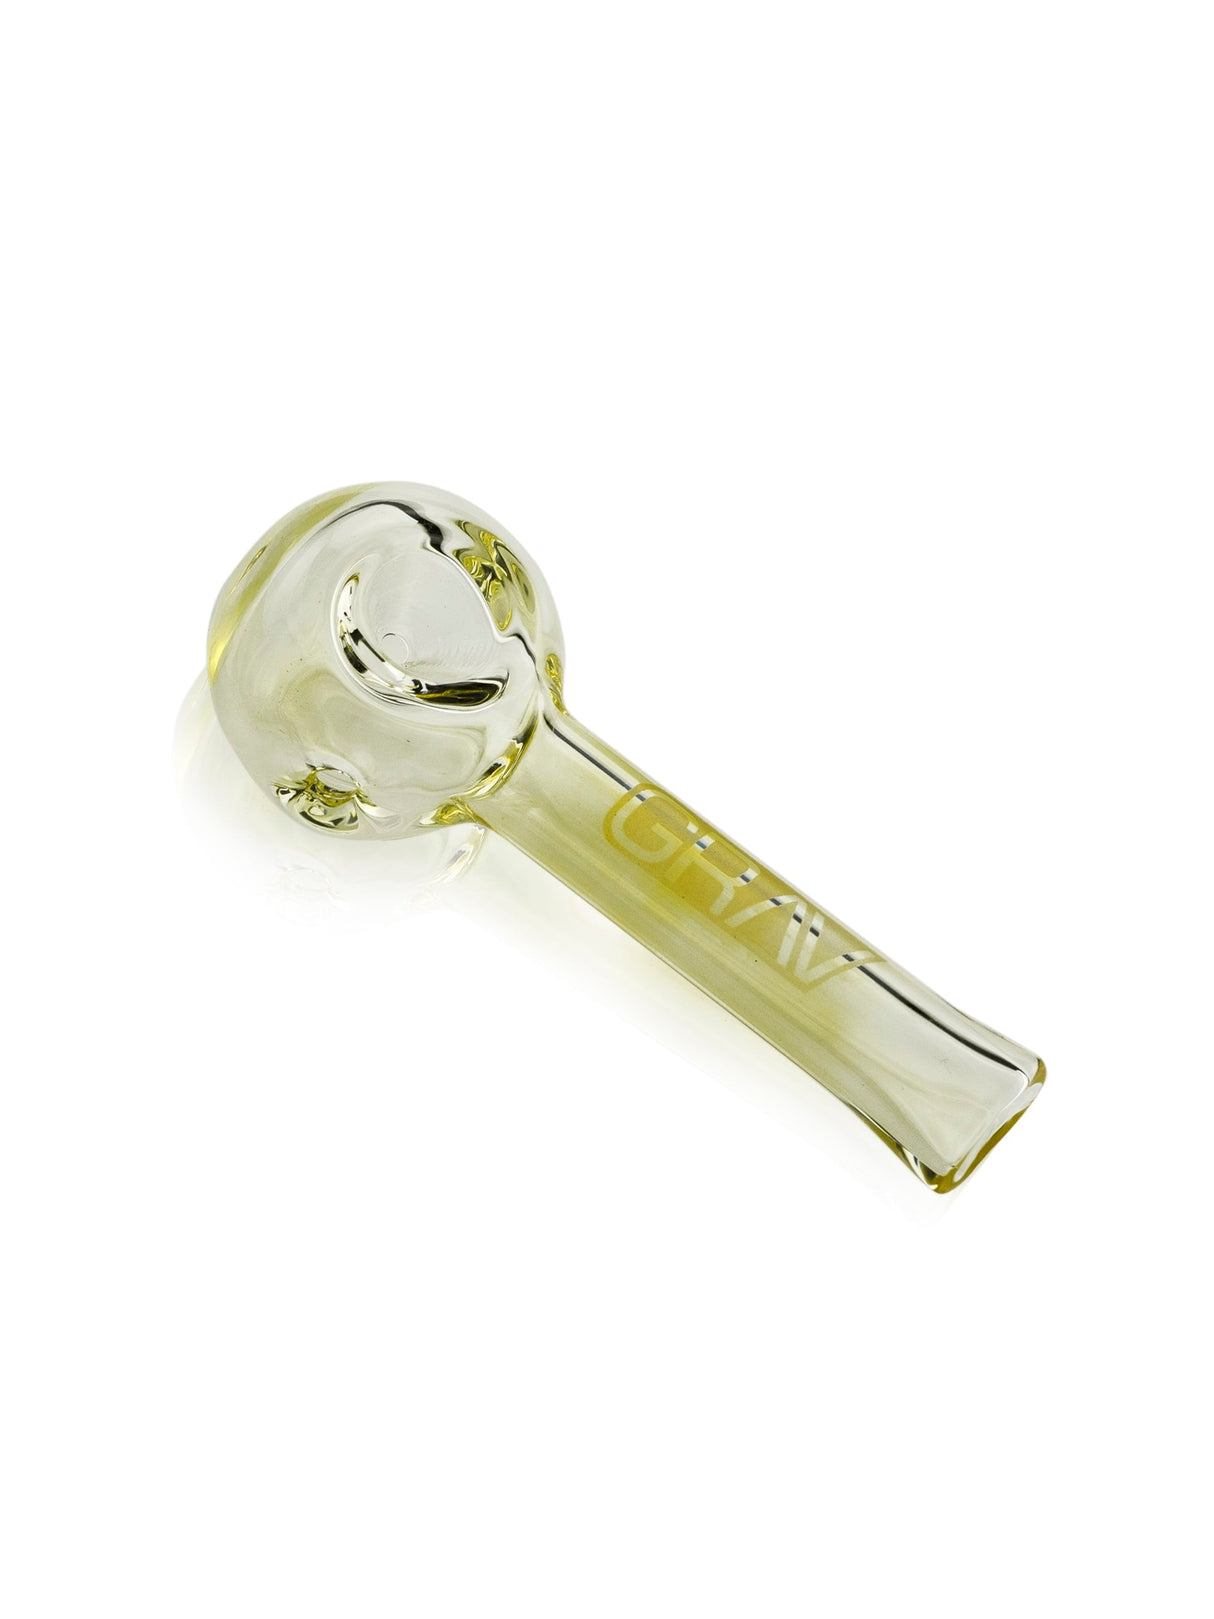 GRAV Pinch Spoon Pipe in Fumed Color Changing Glass, Compact 3.25" Design, Angled Side View